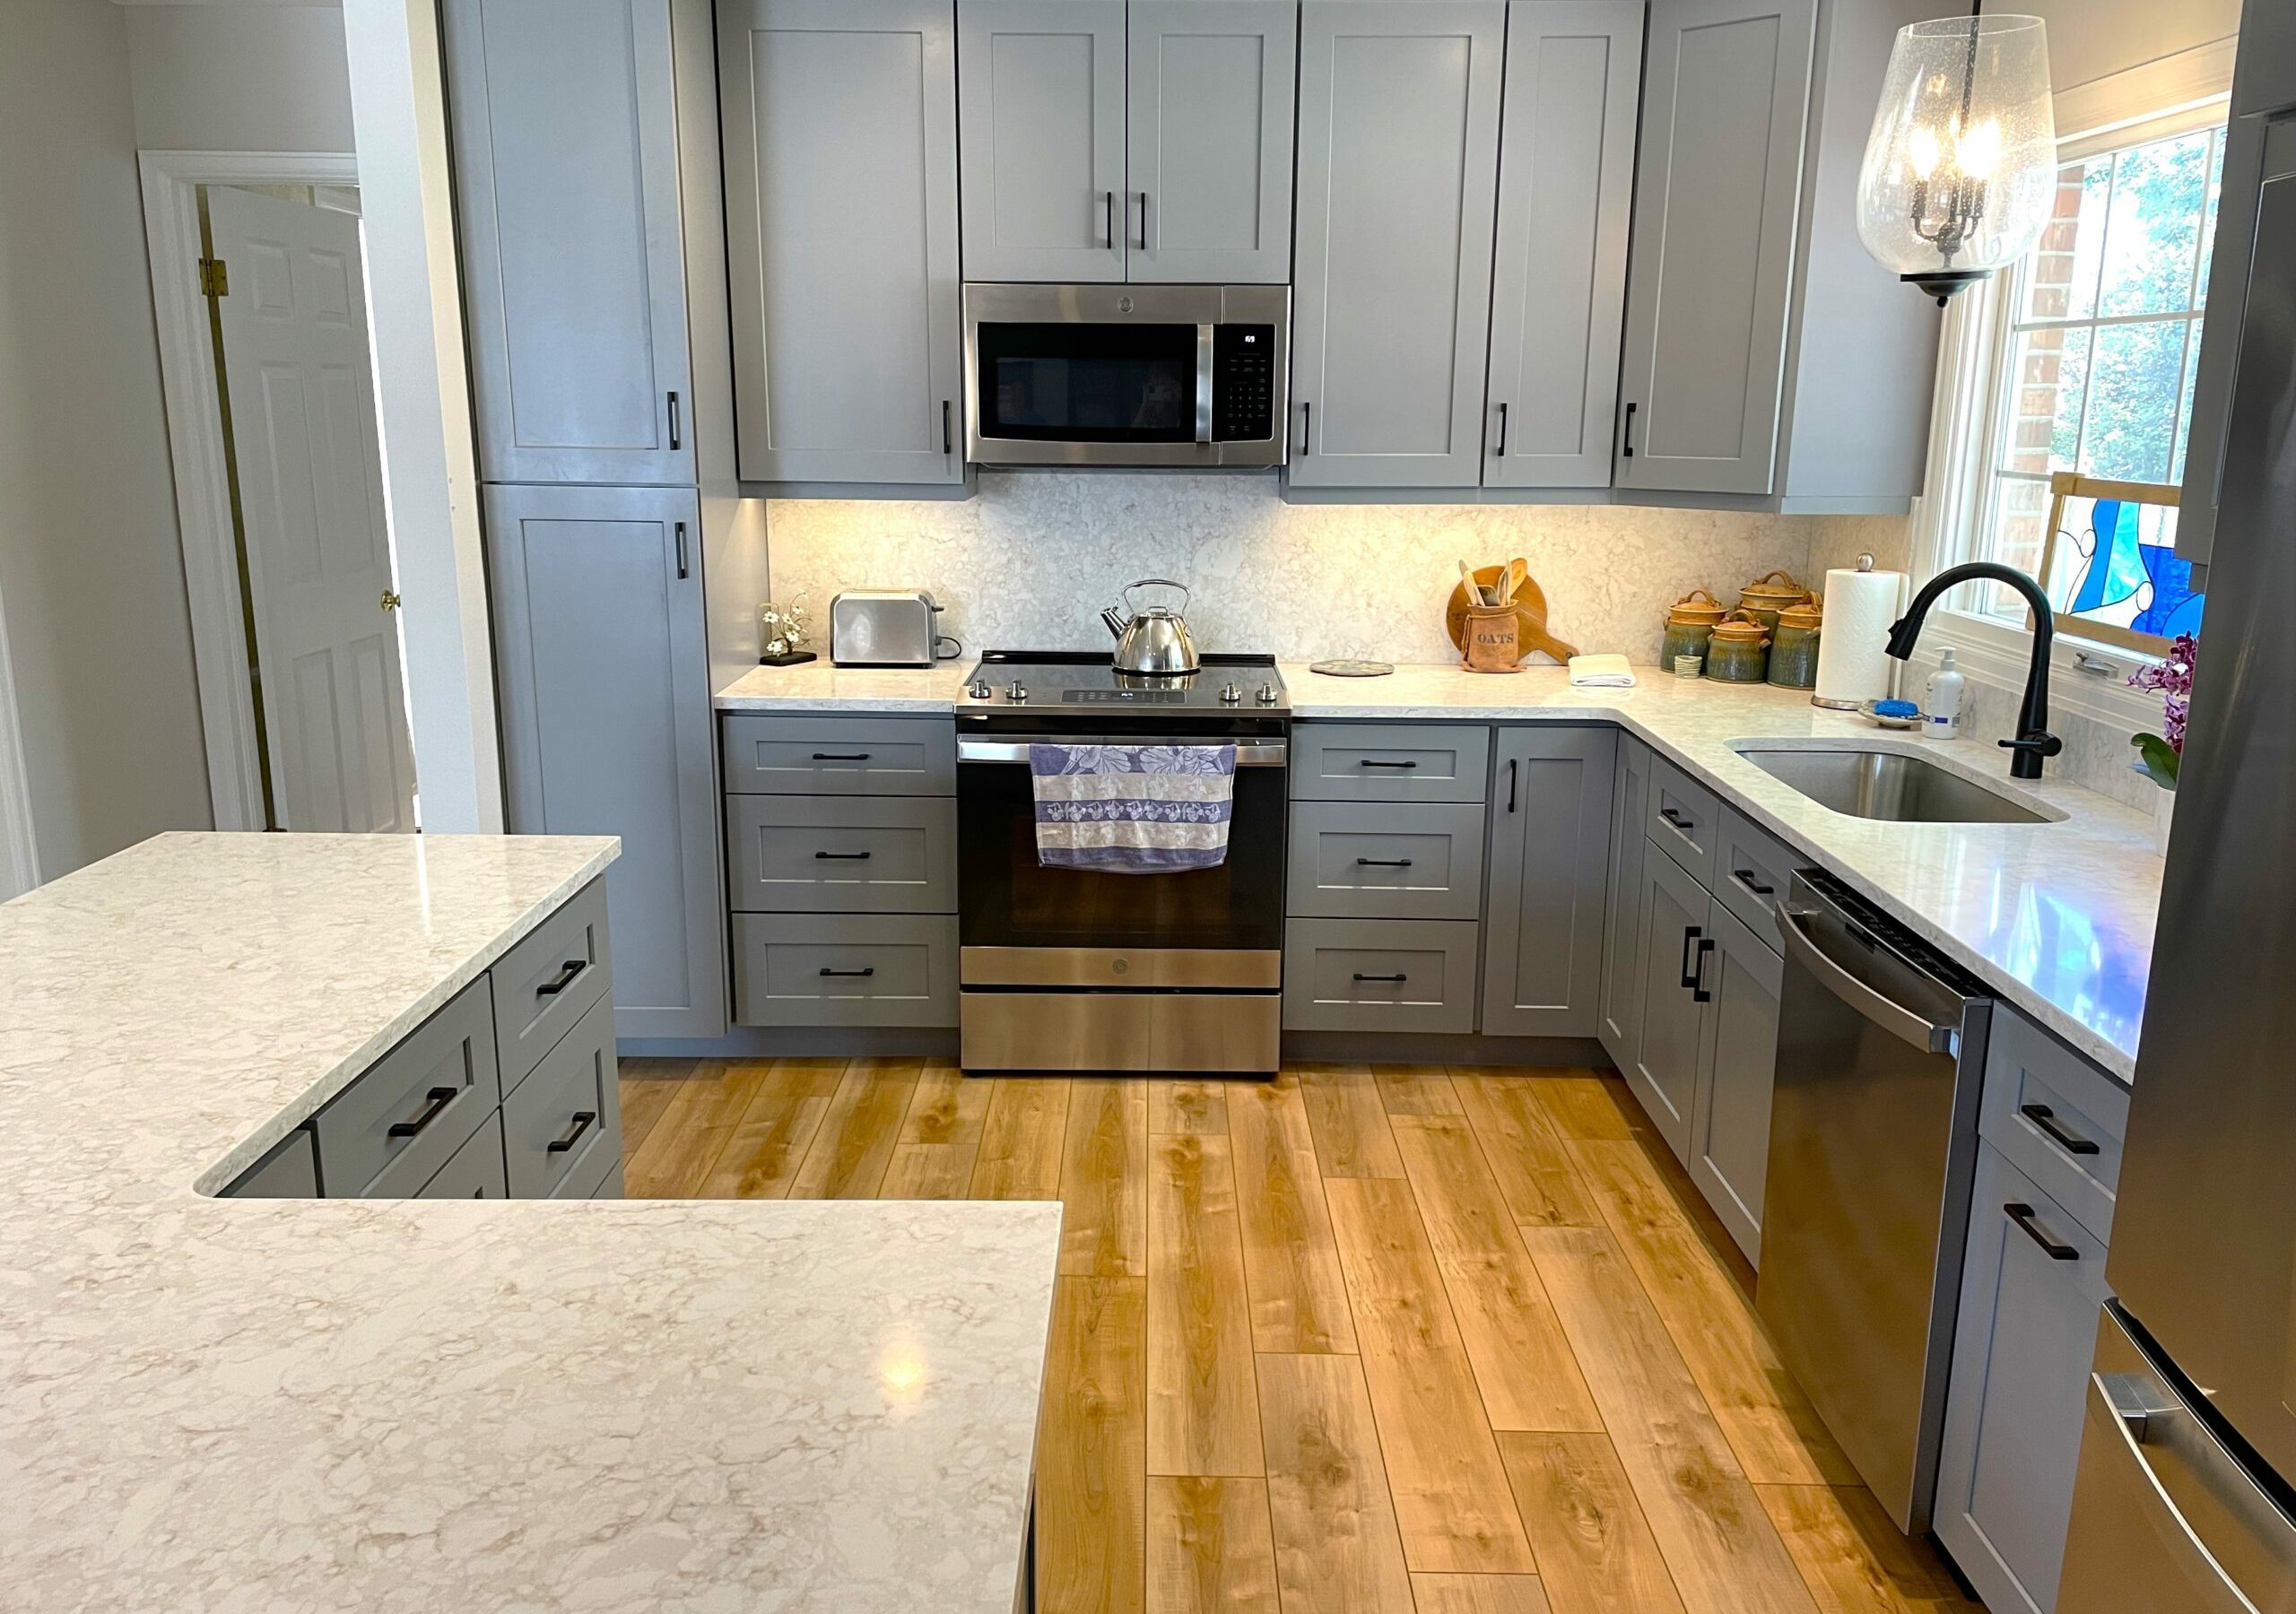 Updated gray kitchen remodel and countertop space